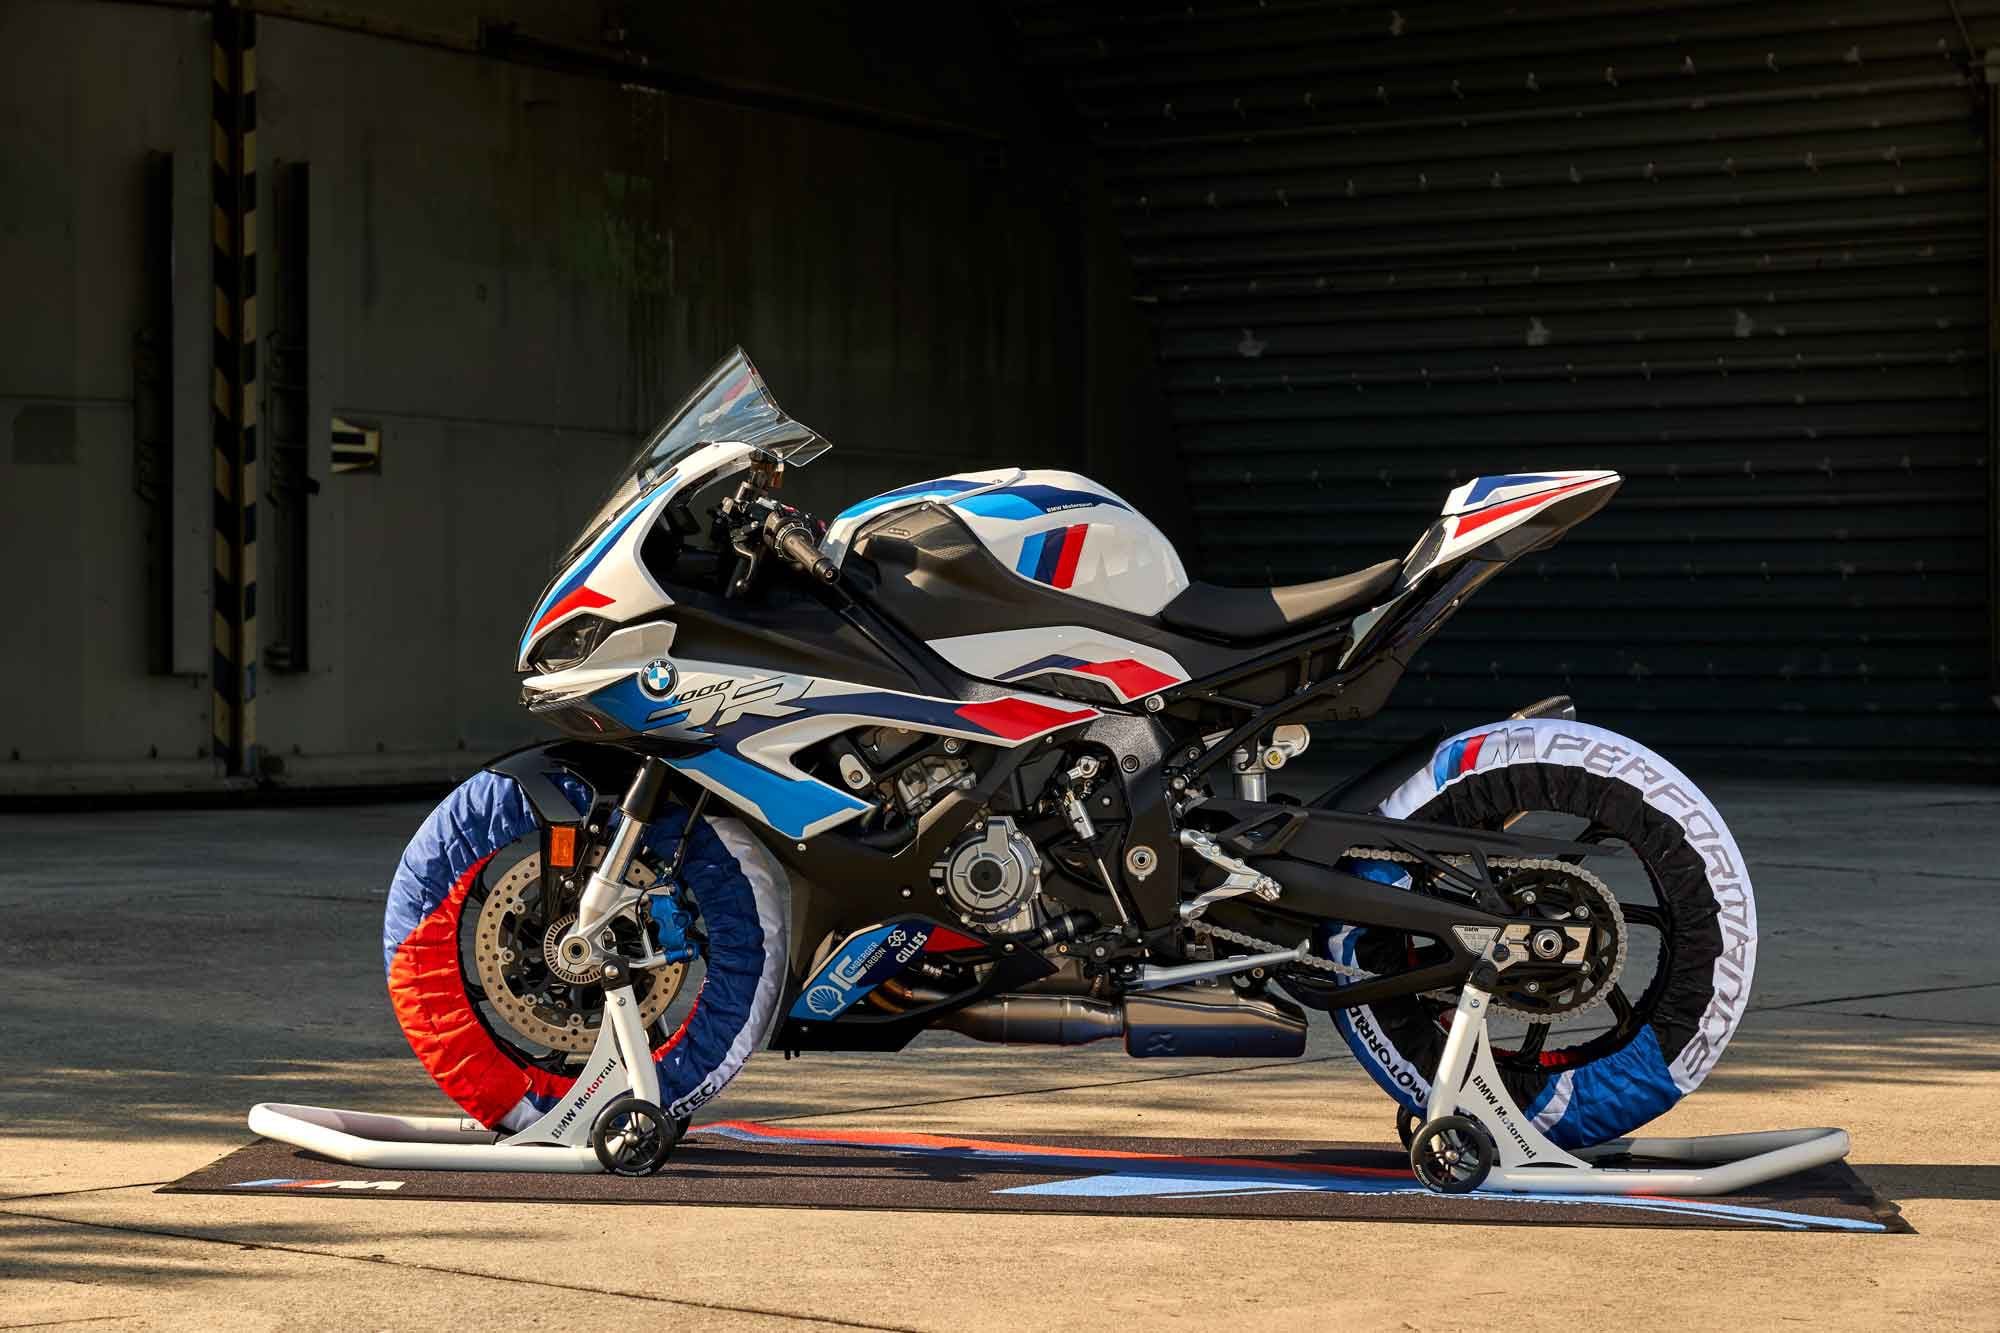 Riders looking for the most bespoke inline four powered liter-bike will appreciate what BMW Motorrad offers with its 2022 M 1000 RR.